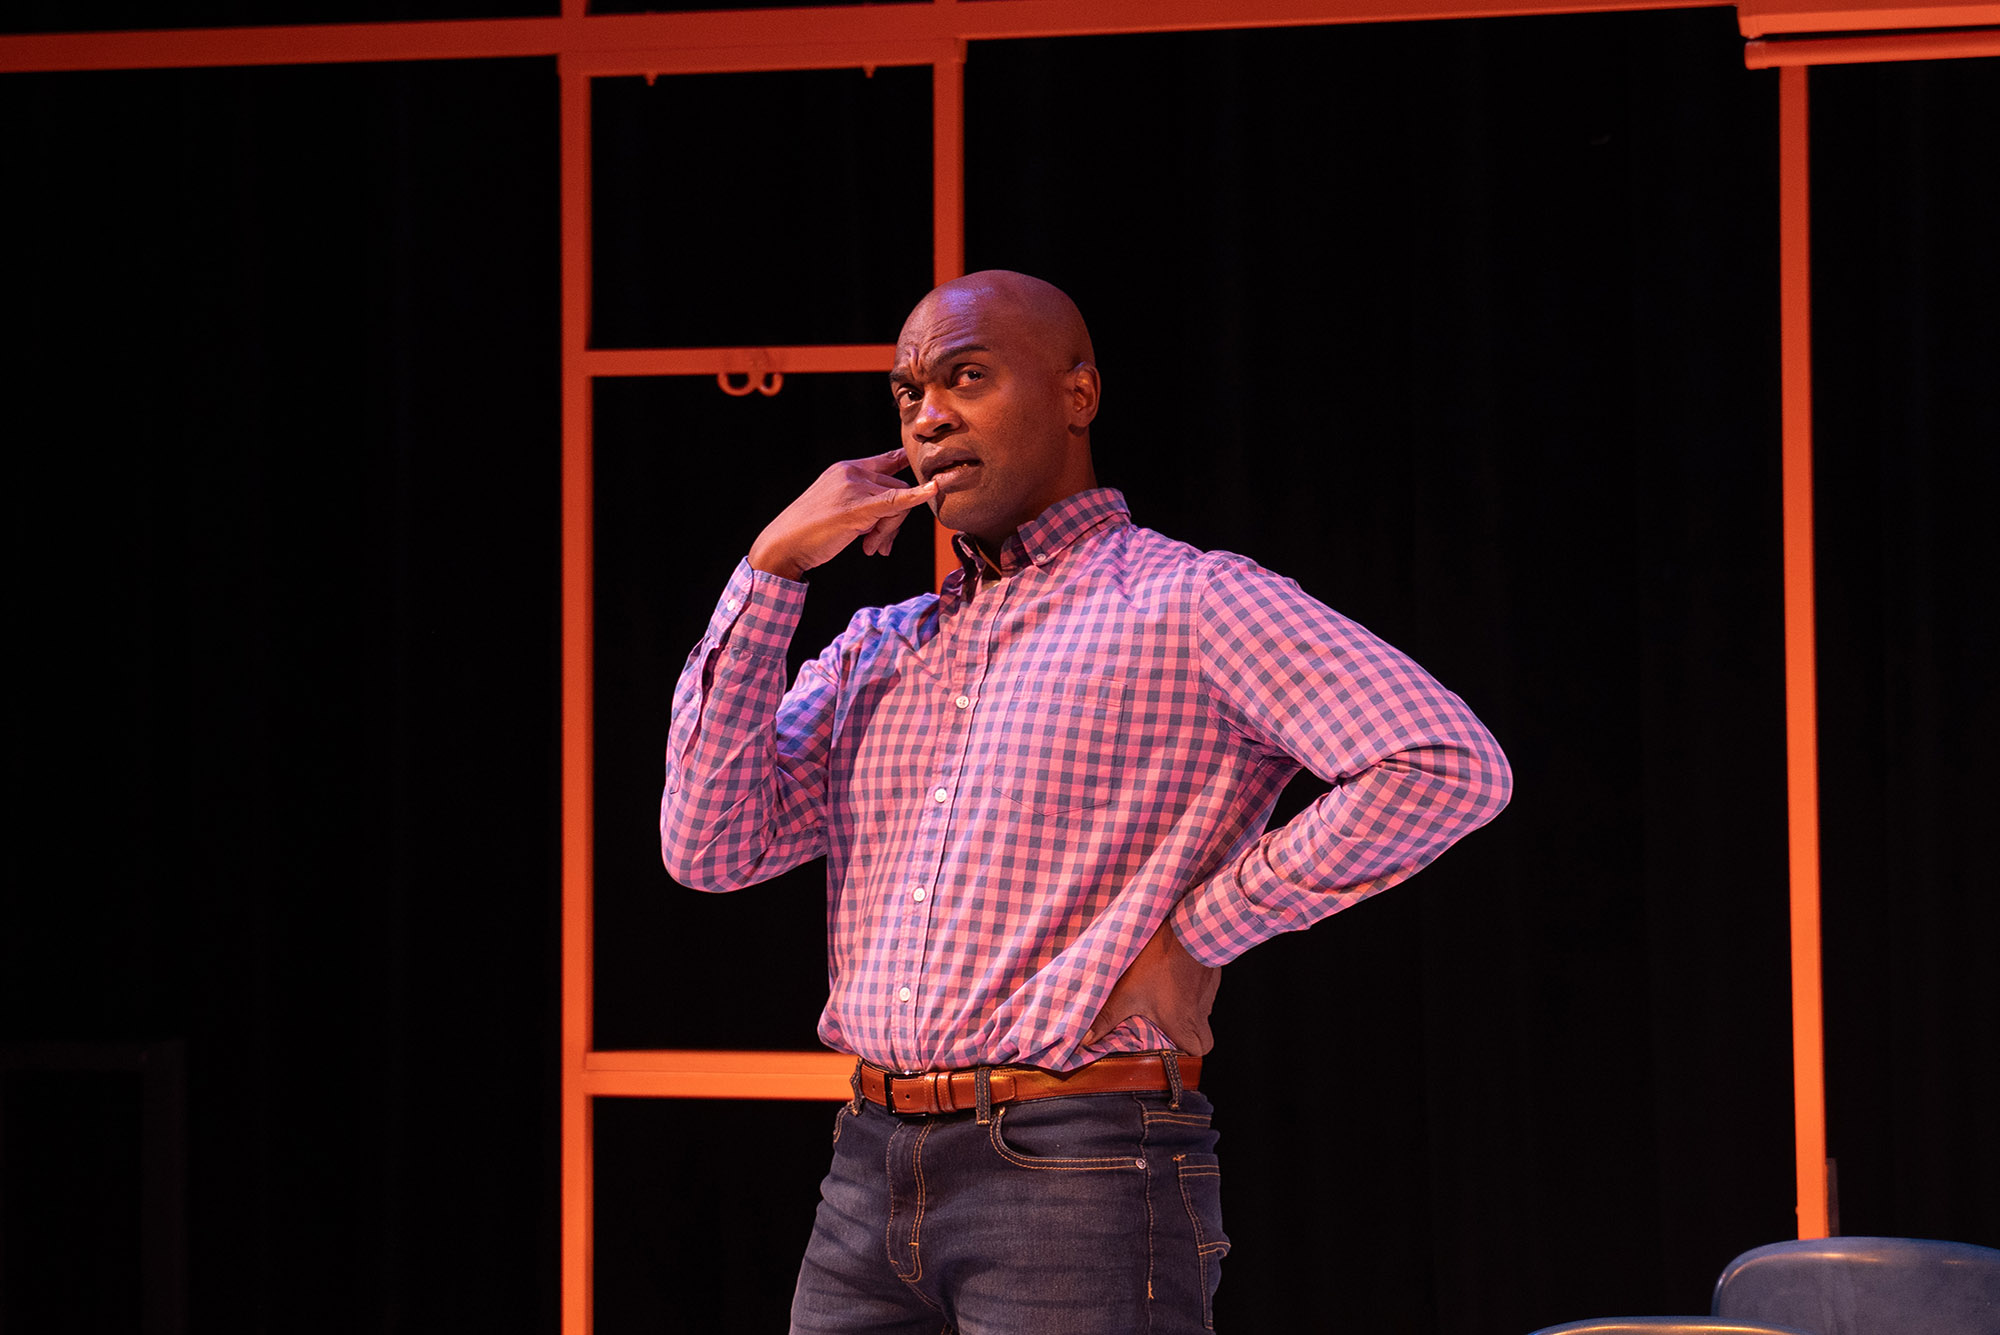 Photo: Maurice Parent, a tall, bald Black man wearing a long-sleeved burgundy, striped collared shirt and jeans, holds one hand to his hip. His other hand is formed into the "phone" motion as he mimes talking into a phone on a stage.